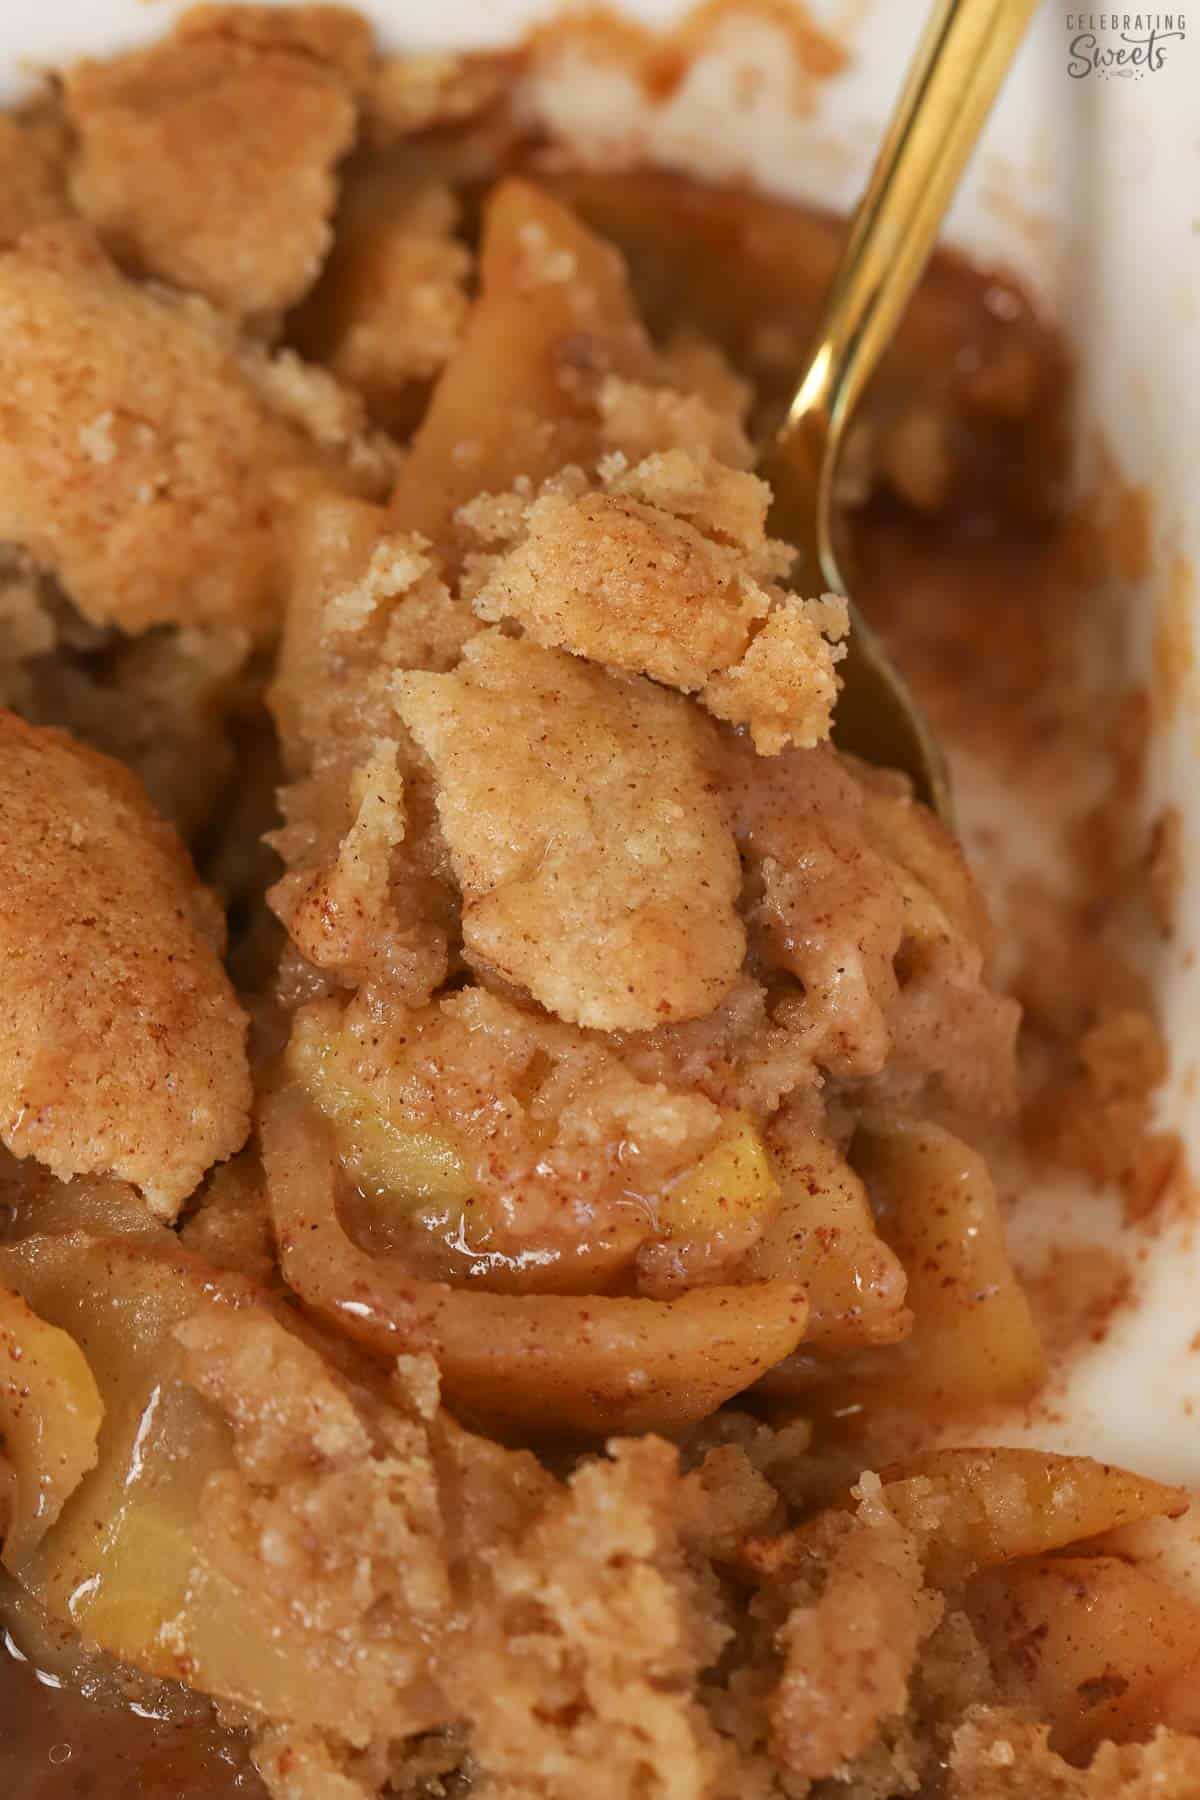 Apple cobbler in a white baking dish with a gold spoon.